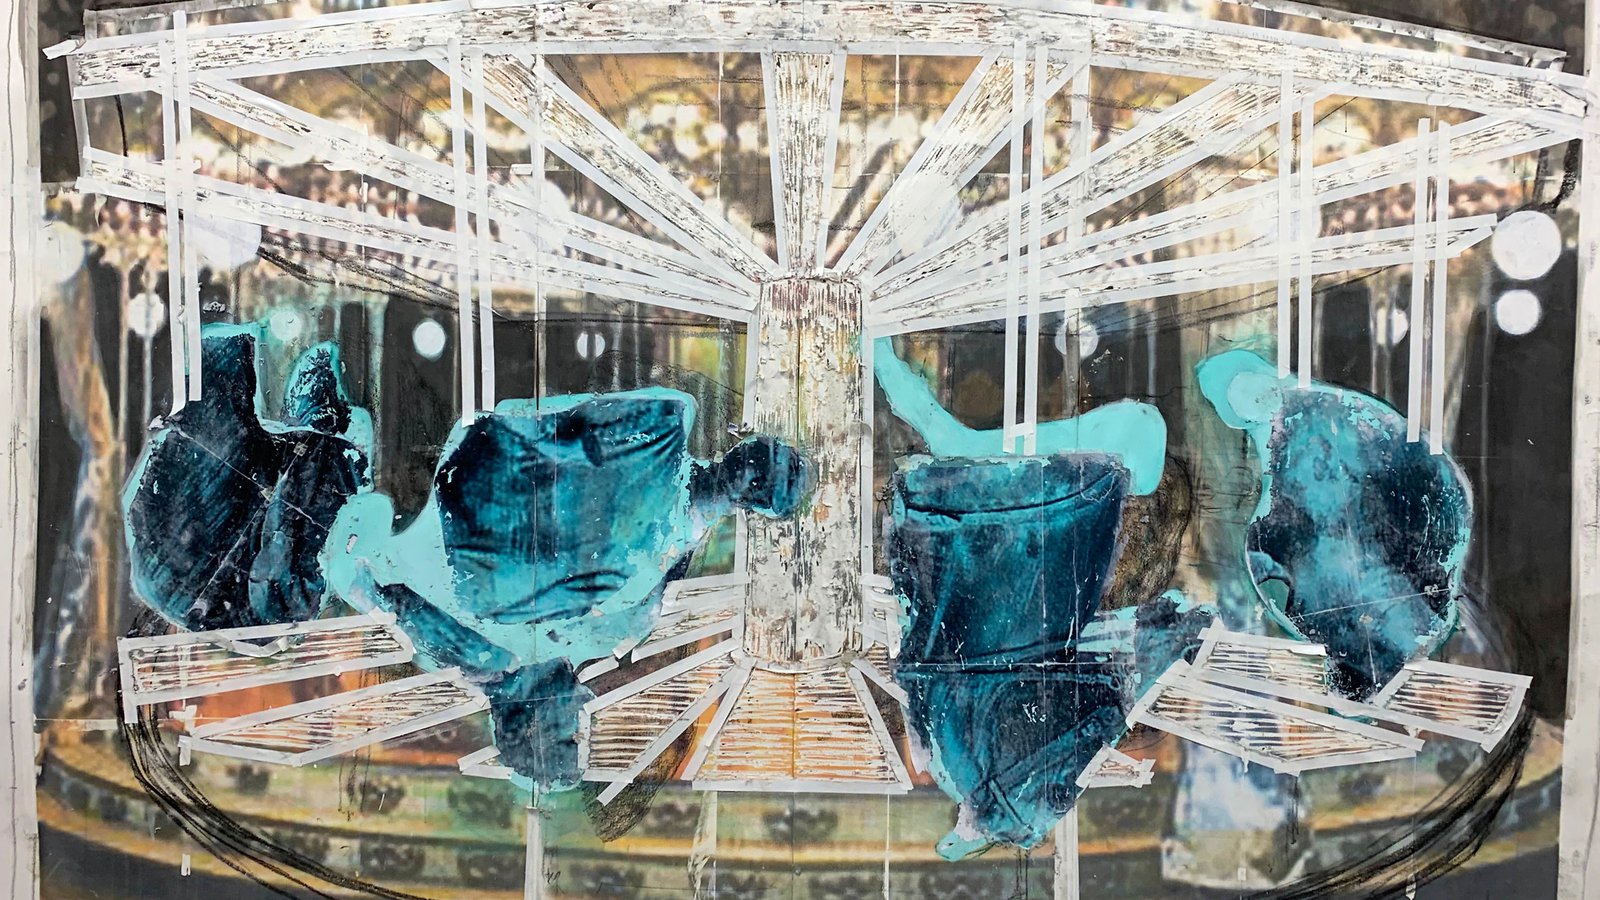 Baris Gokturk, The Carousel, 2019.Mixed media and image transfer on paper, 152.4 x 101.6 cm (60 x 40 in). Courtesy of the artist and Anaïs Lellouche.